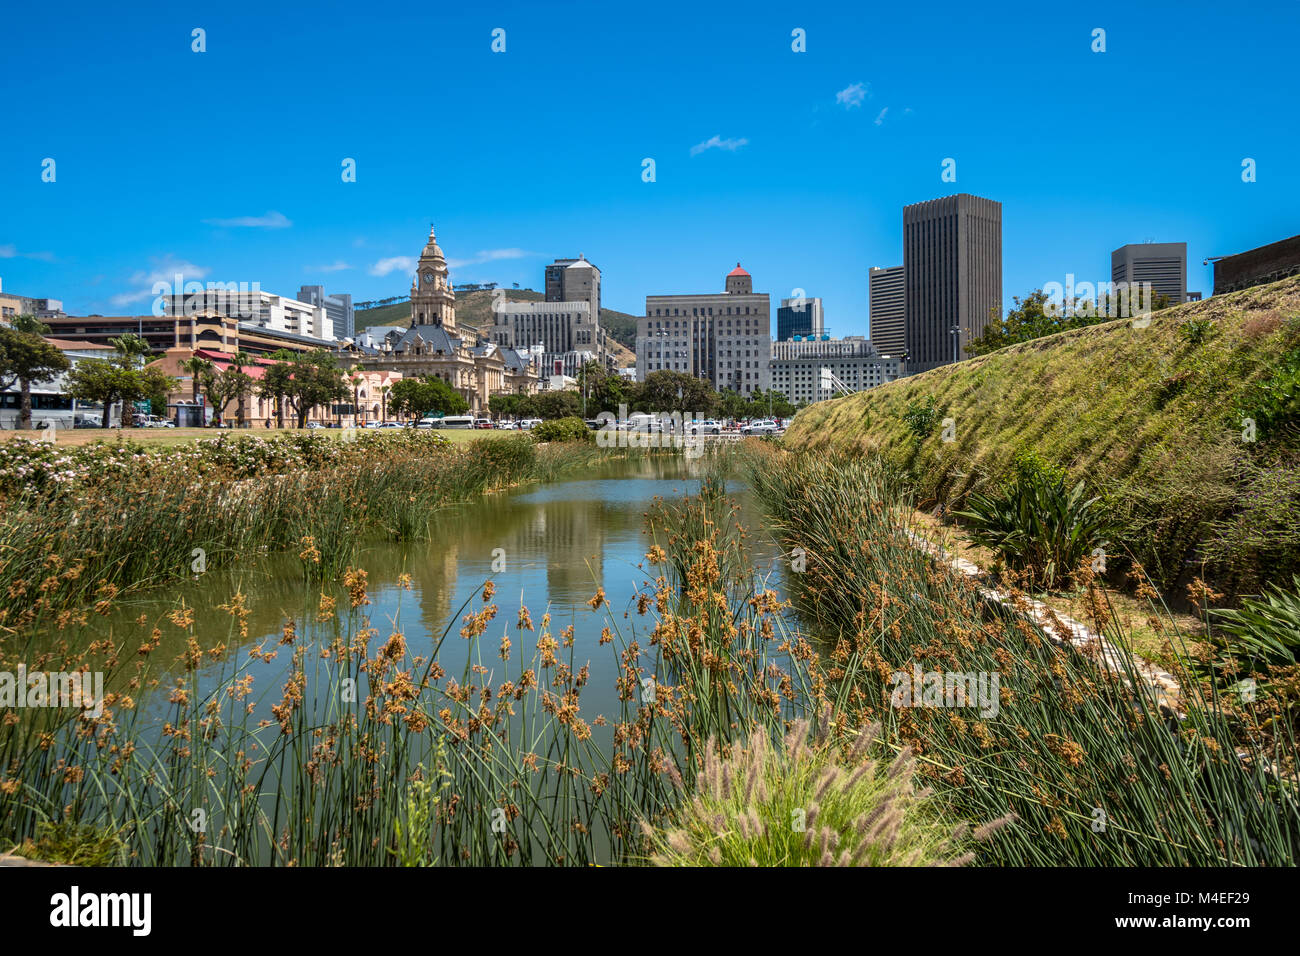 City skyline and moat at Castle of Good Hope, Cape Town, Western Cape, South Africa Stock Photo